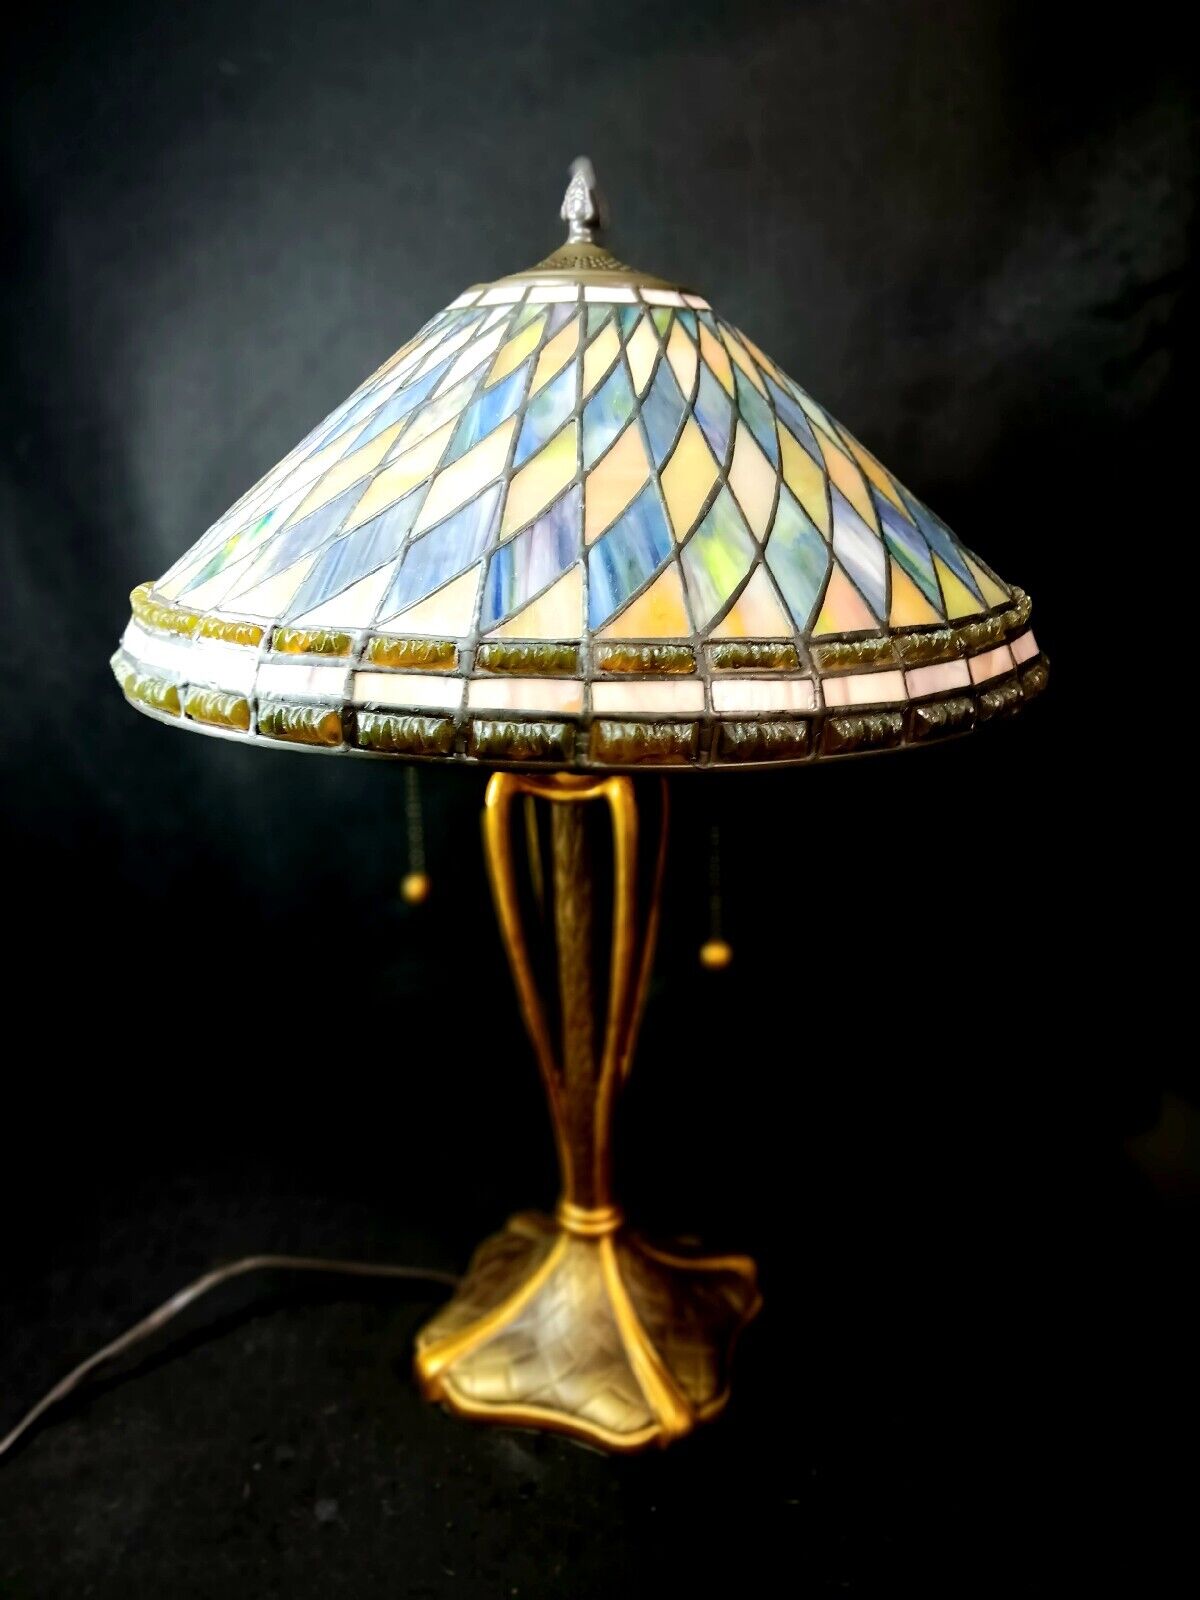 Quoizel Stained Glass Lamp With Geometric Design Vintage Stunning 